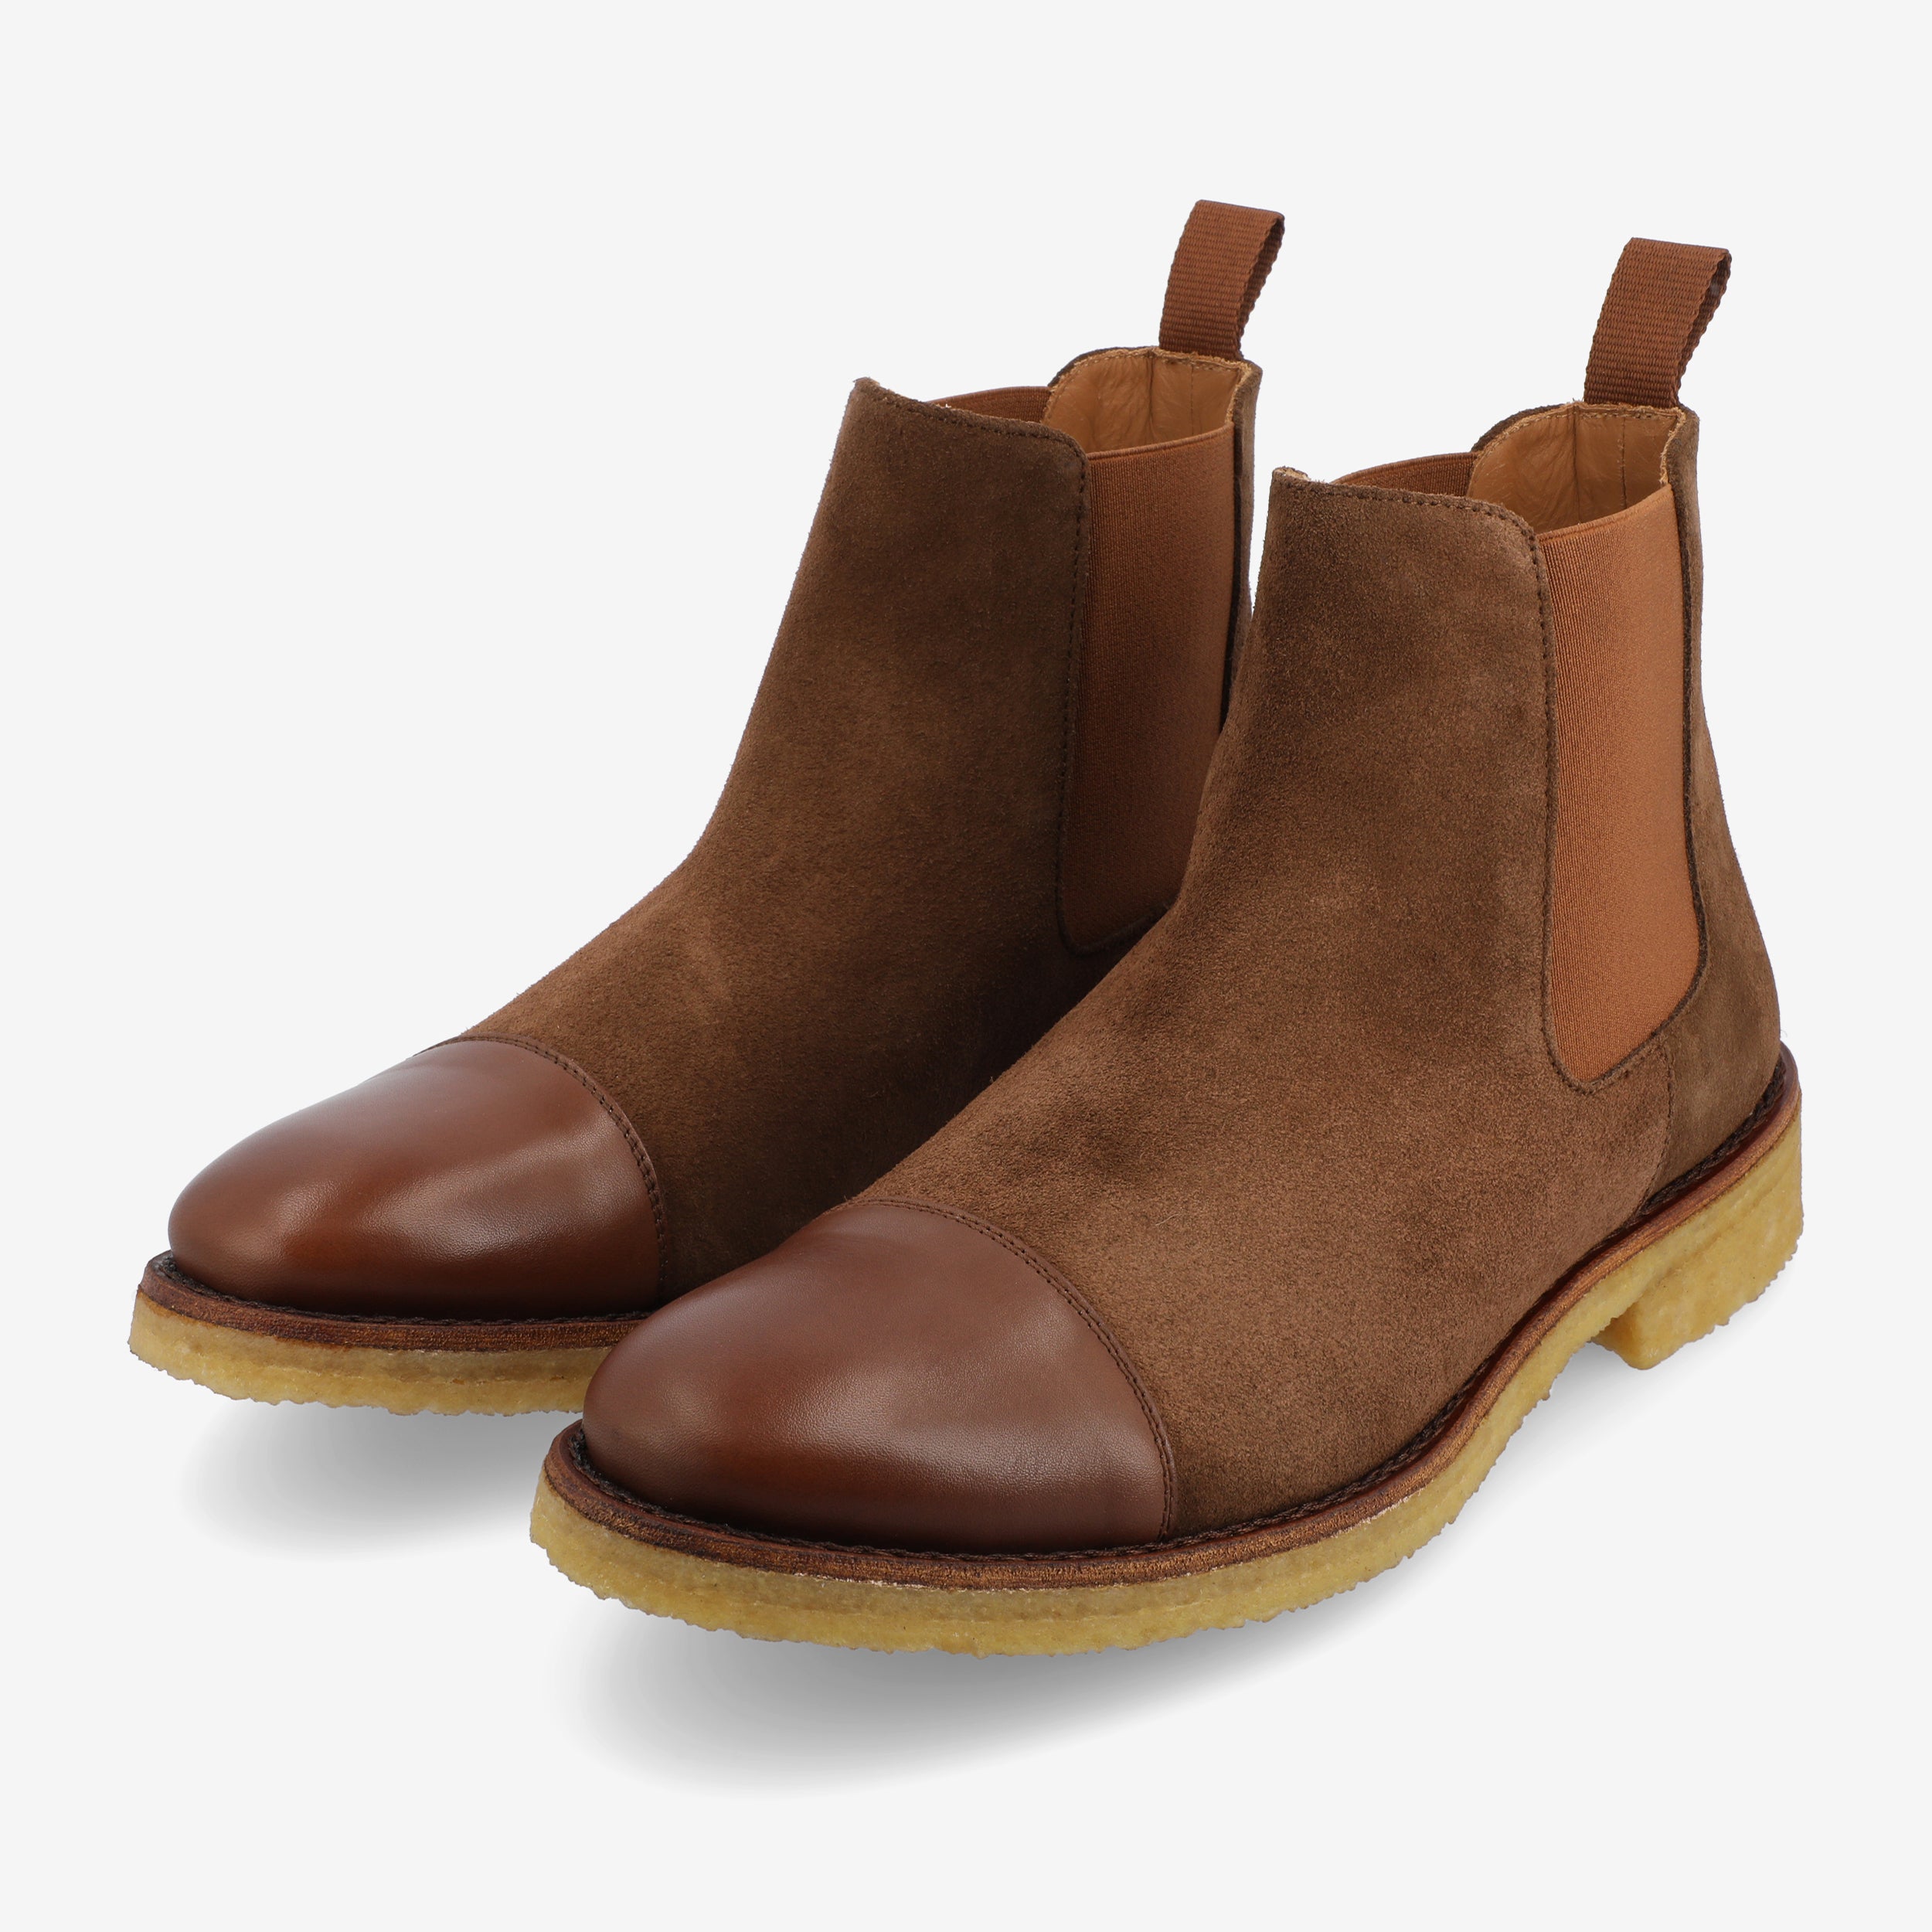 The Outback Boot in Mocha (Last Chance, Final Sale)